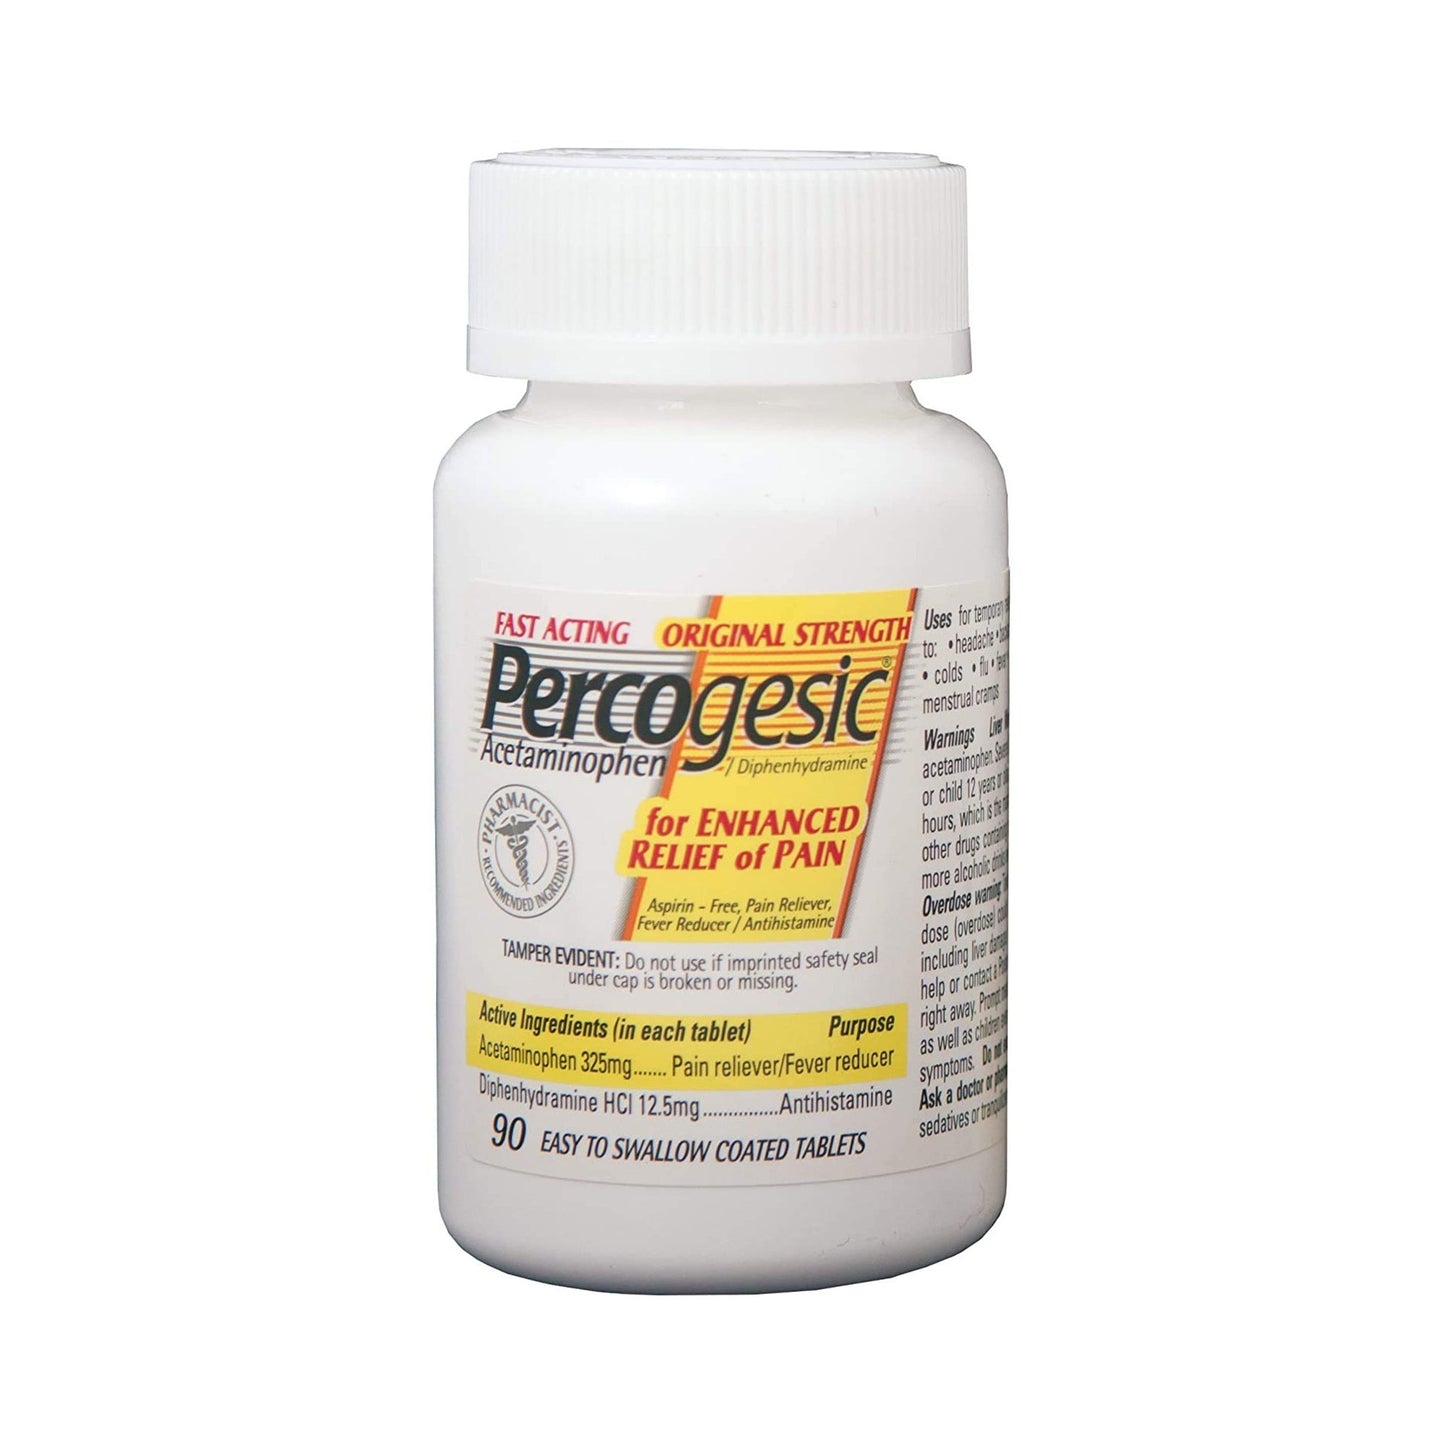 Percogesic® Acetaminophen / Diphenhydramine Pain and Allergy Relief, 90 ct